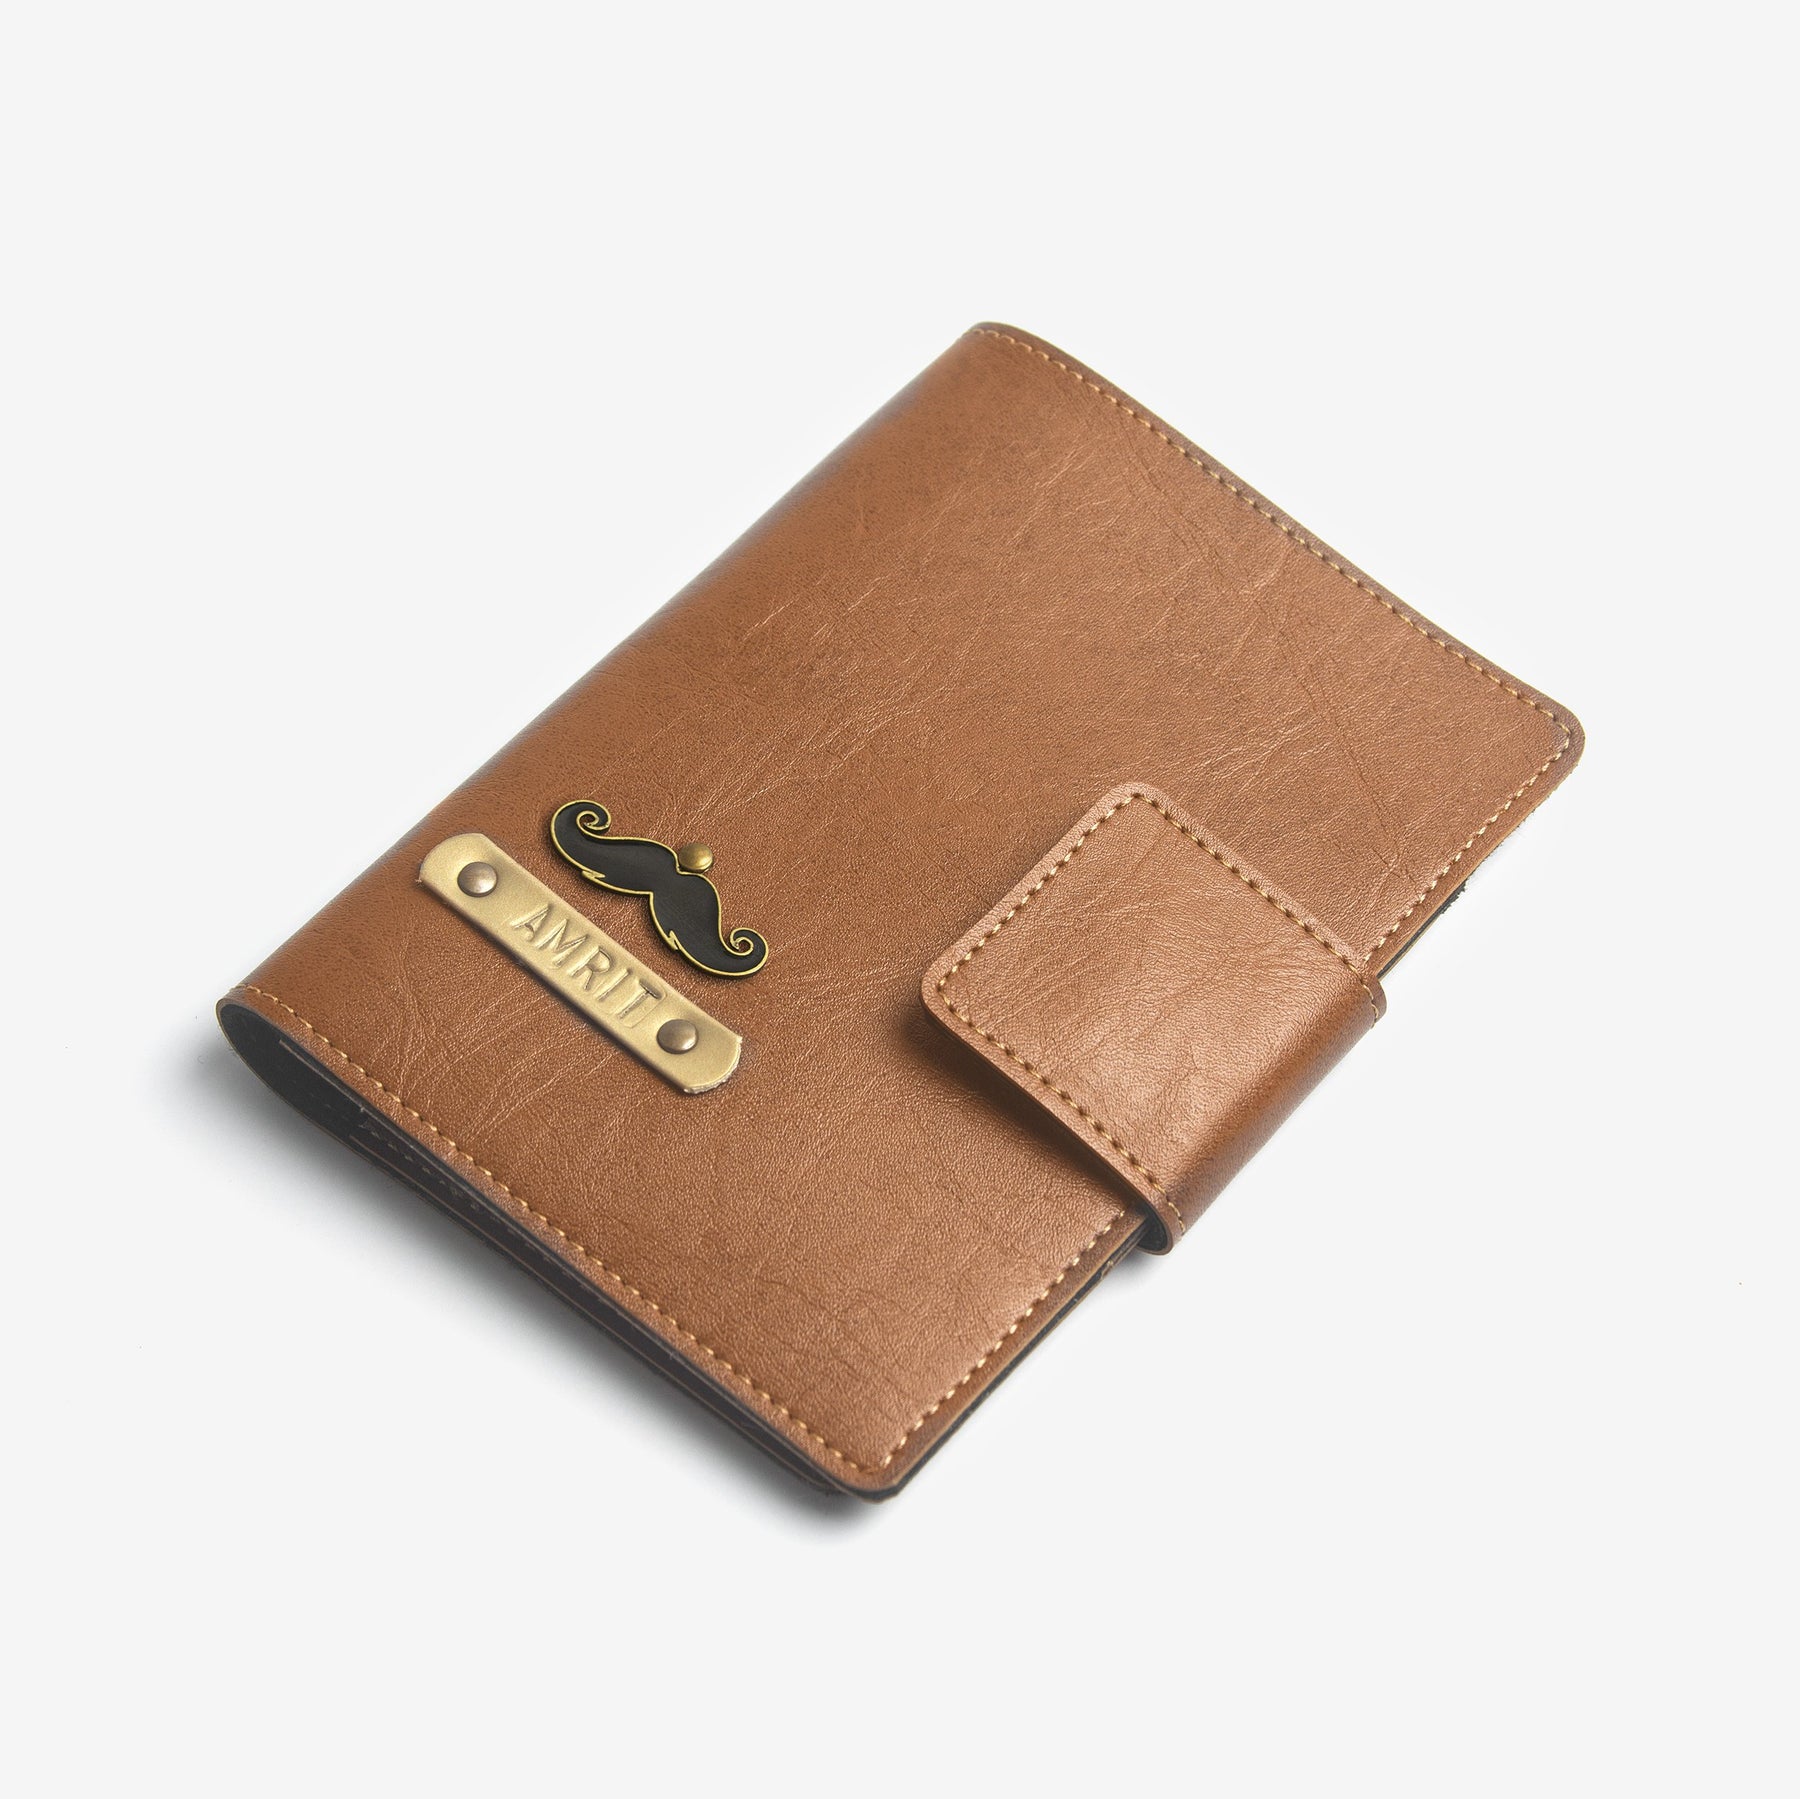 The Messy Corner Mini Travel Wallet Passport cover with button - Tan